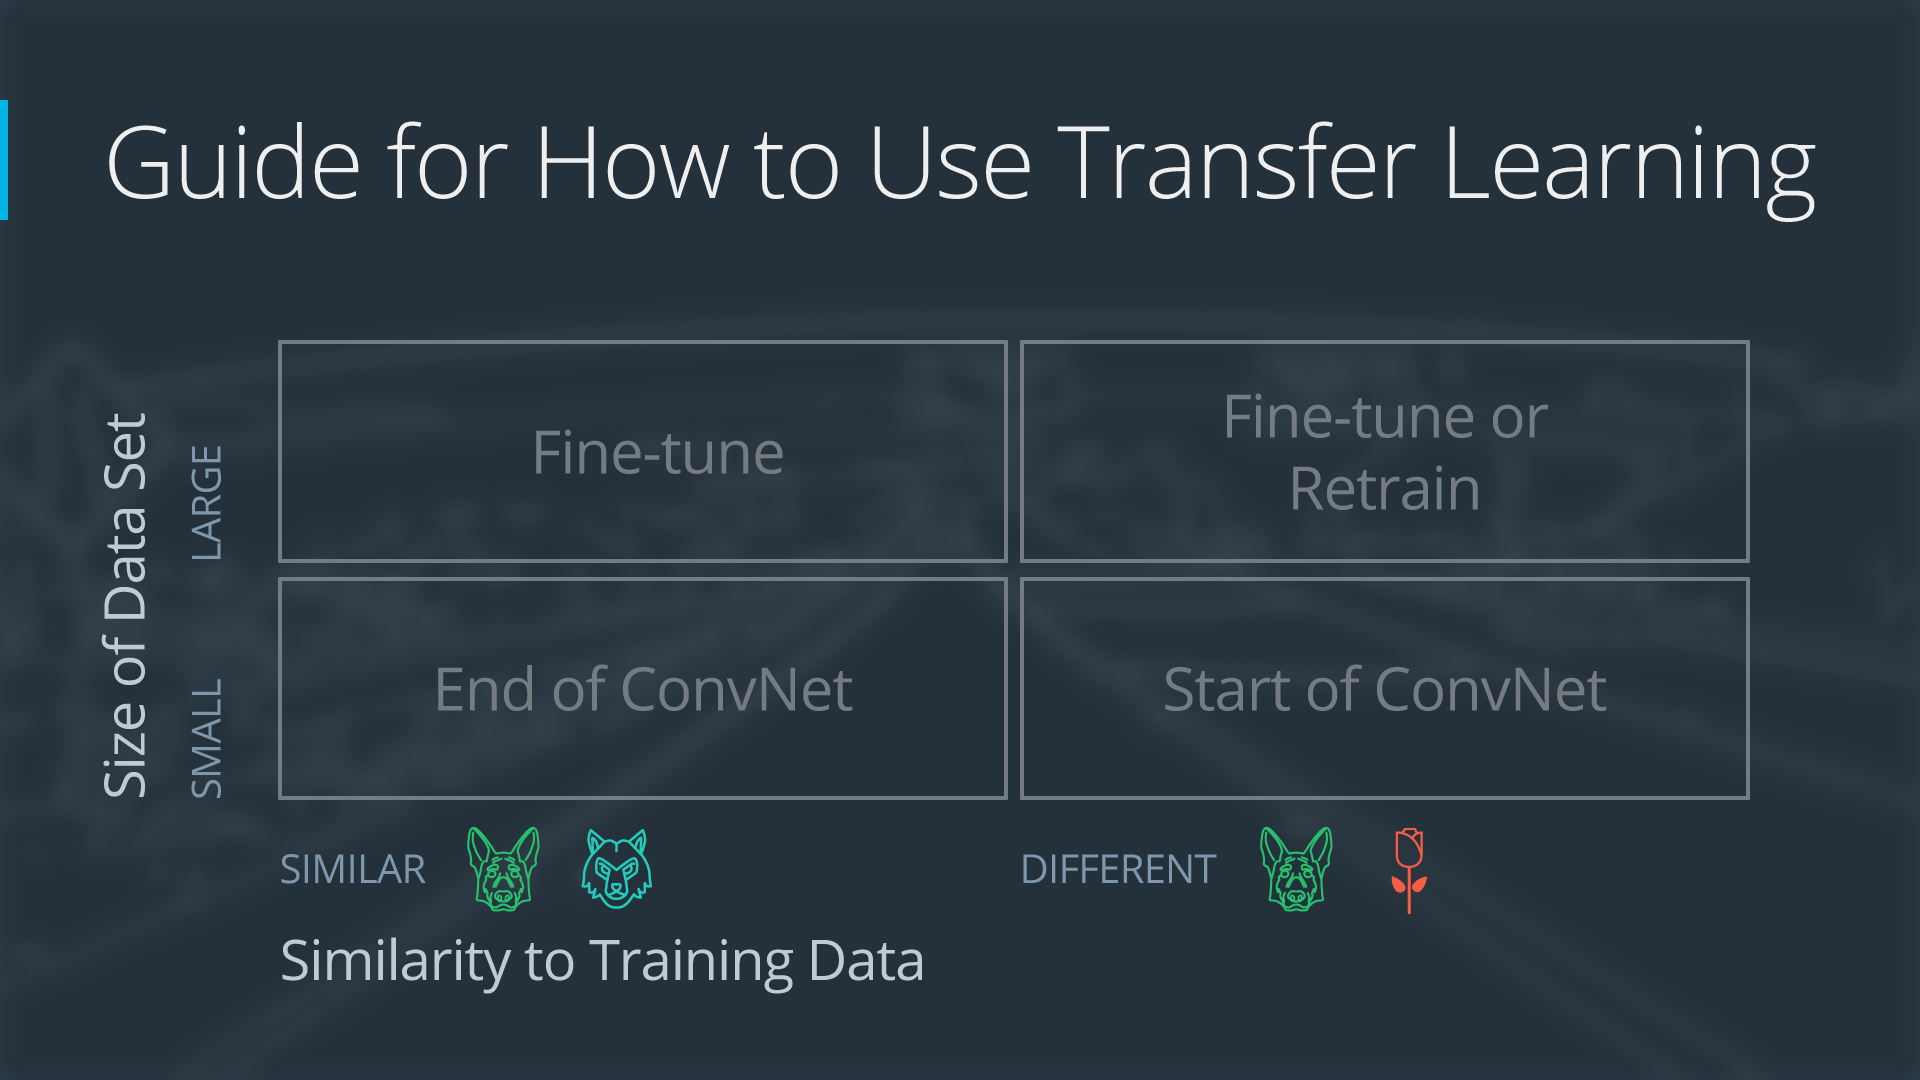 Four Cases When Using Transfer Learning